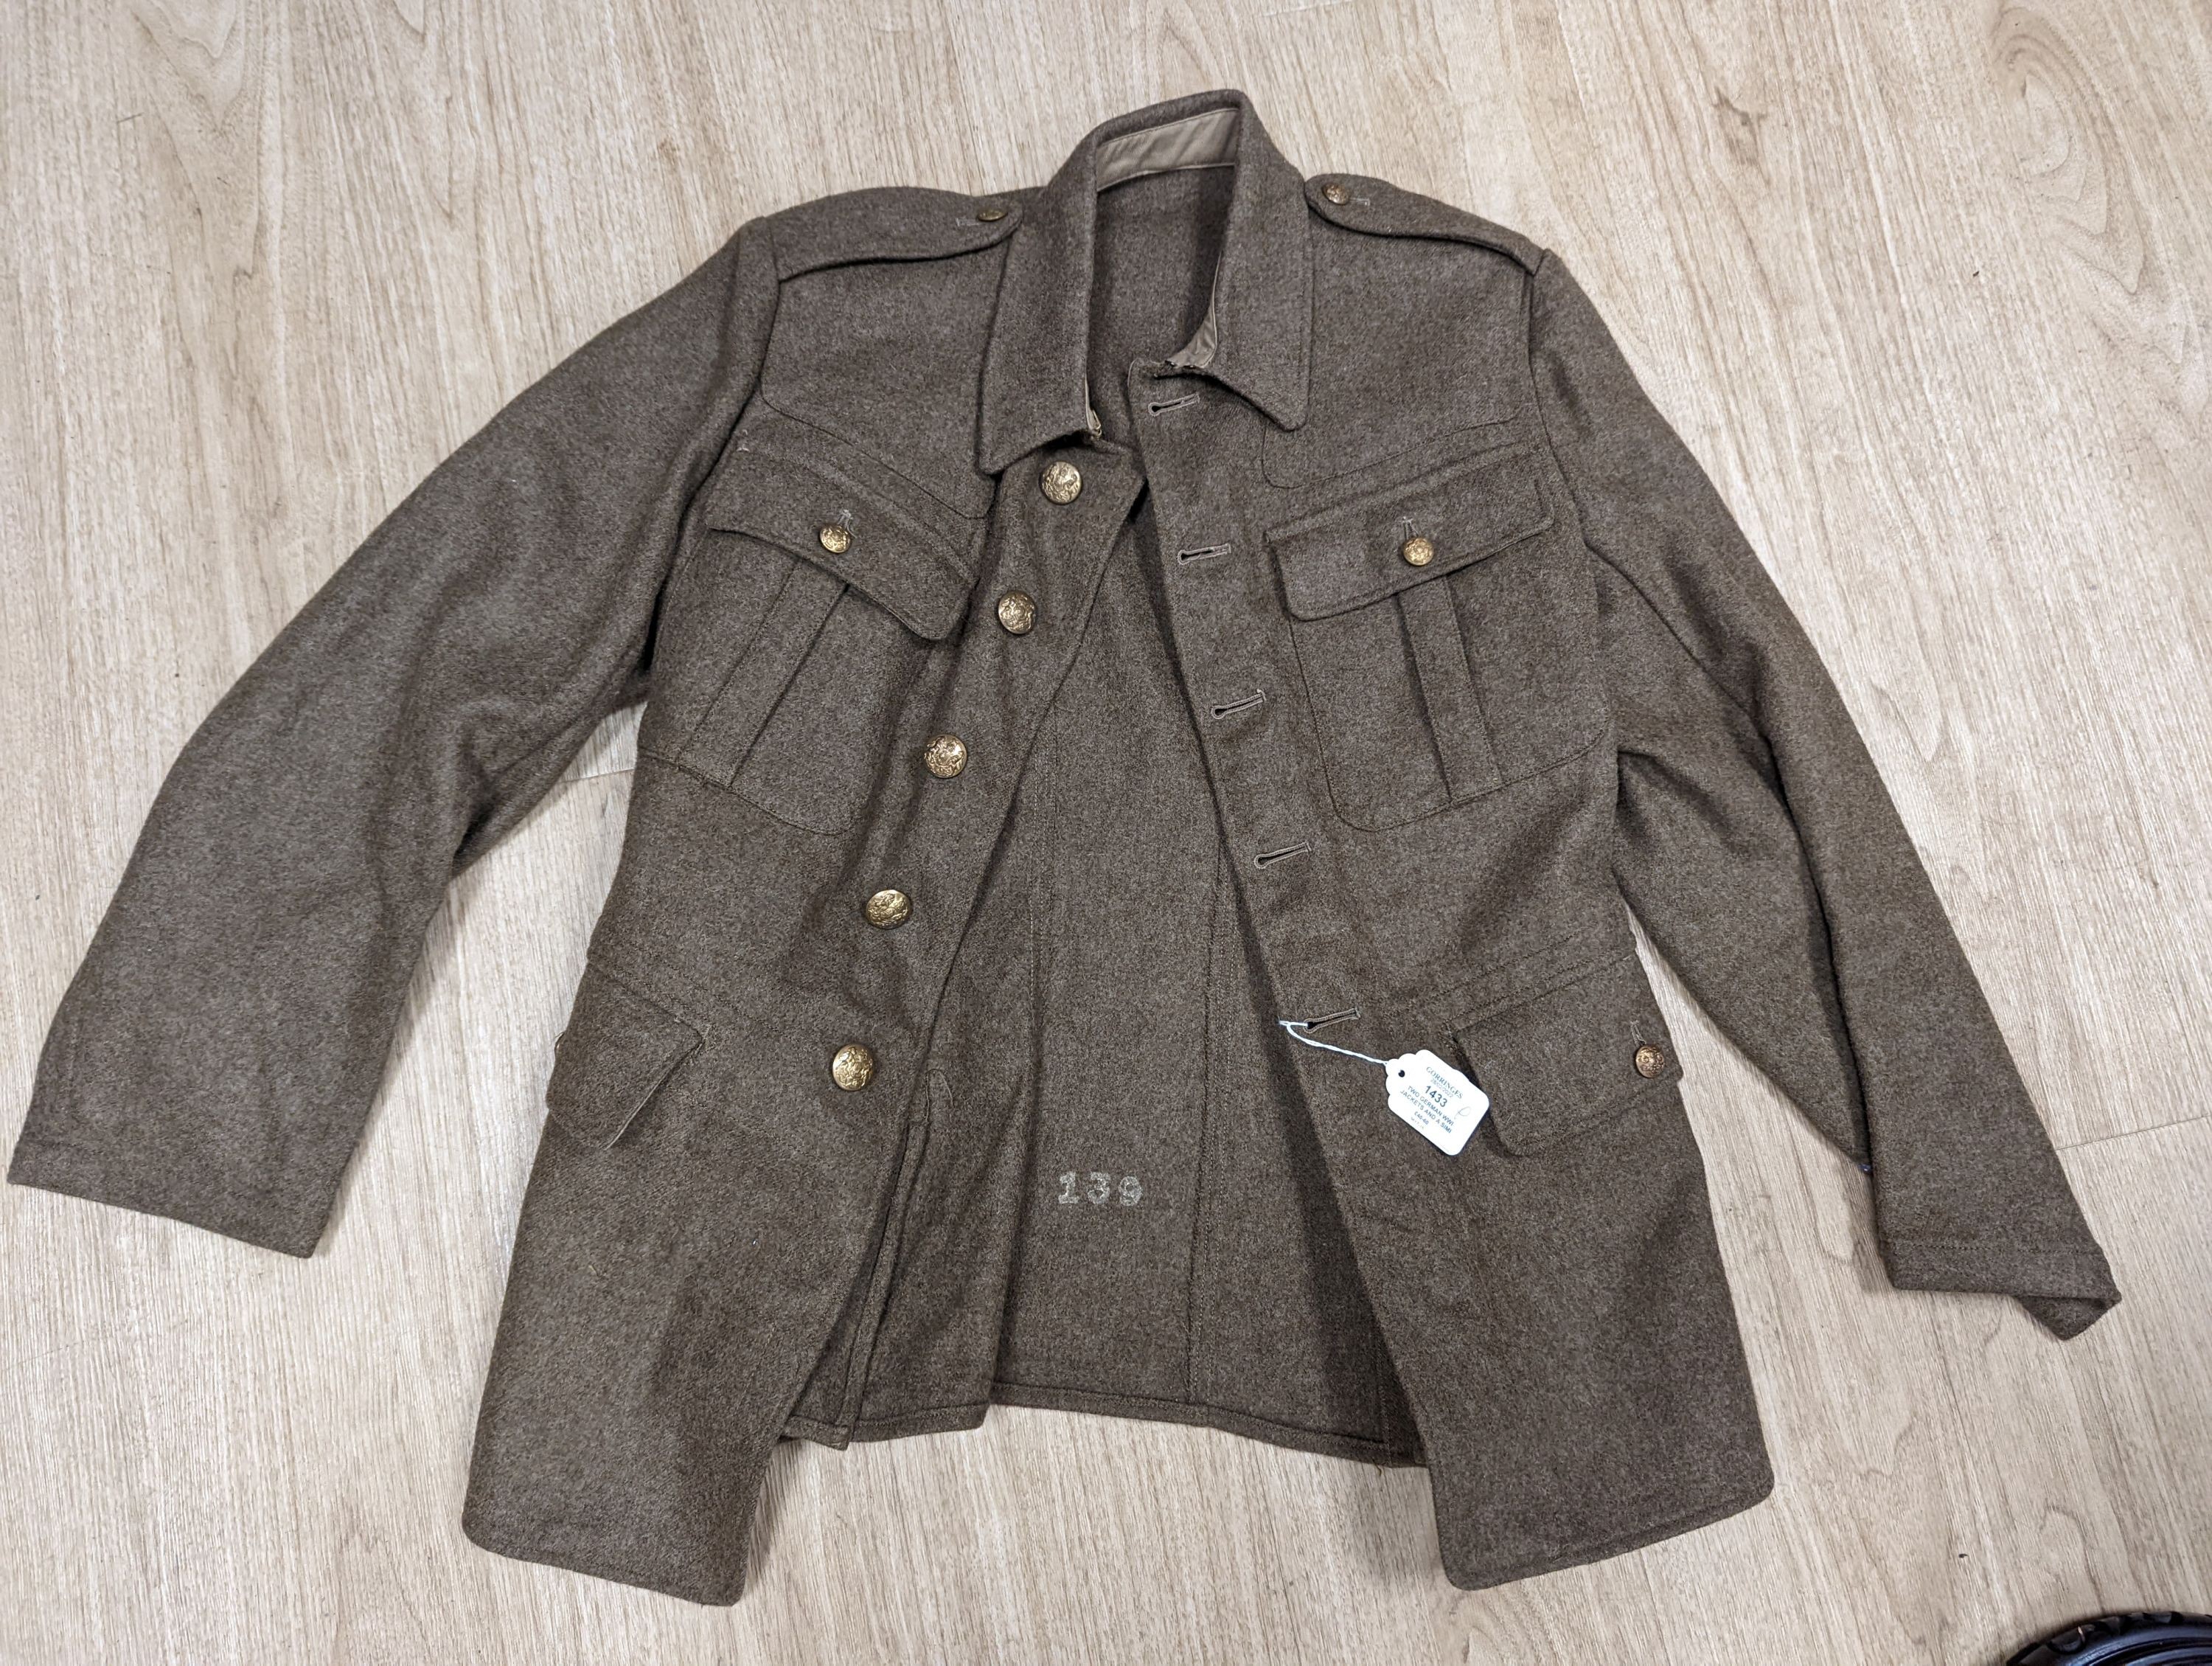 Two German WWI jackets and a similar British jacket.